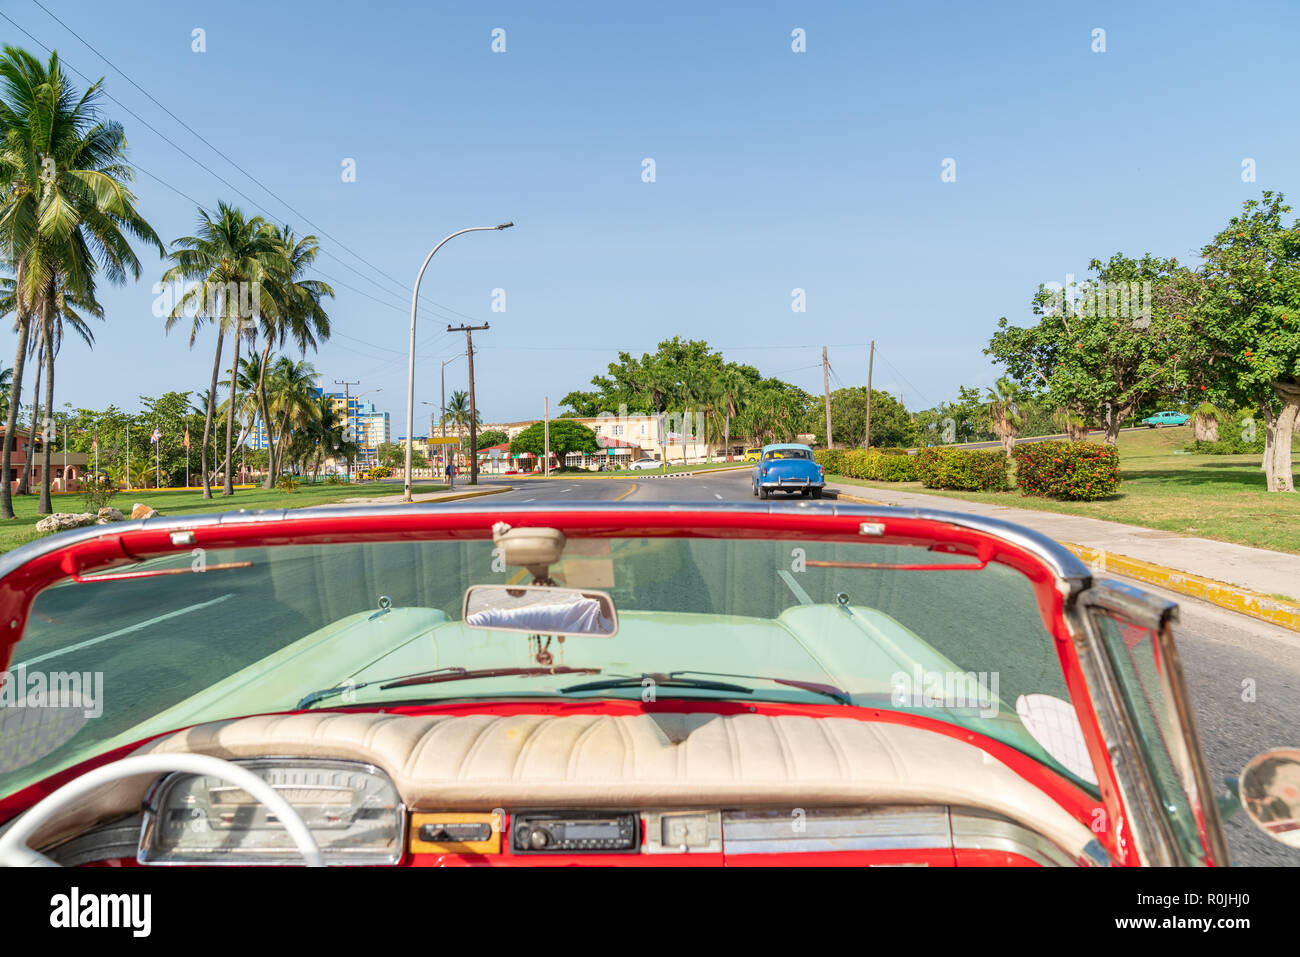 Cuba Varadero, inside an old vintage classic american car, view of cityscape sunny day. Stock Photo